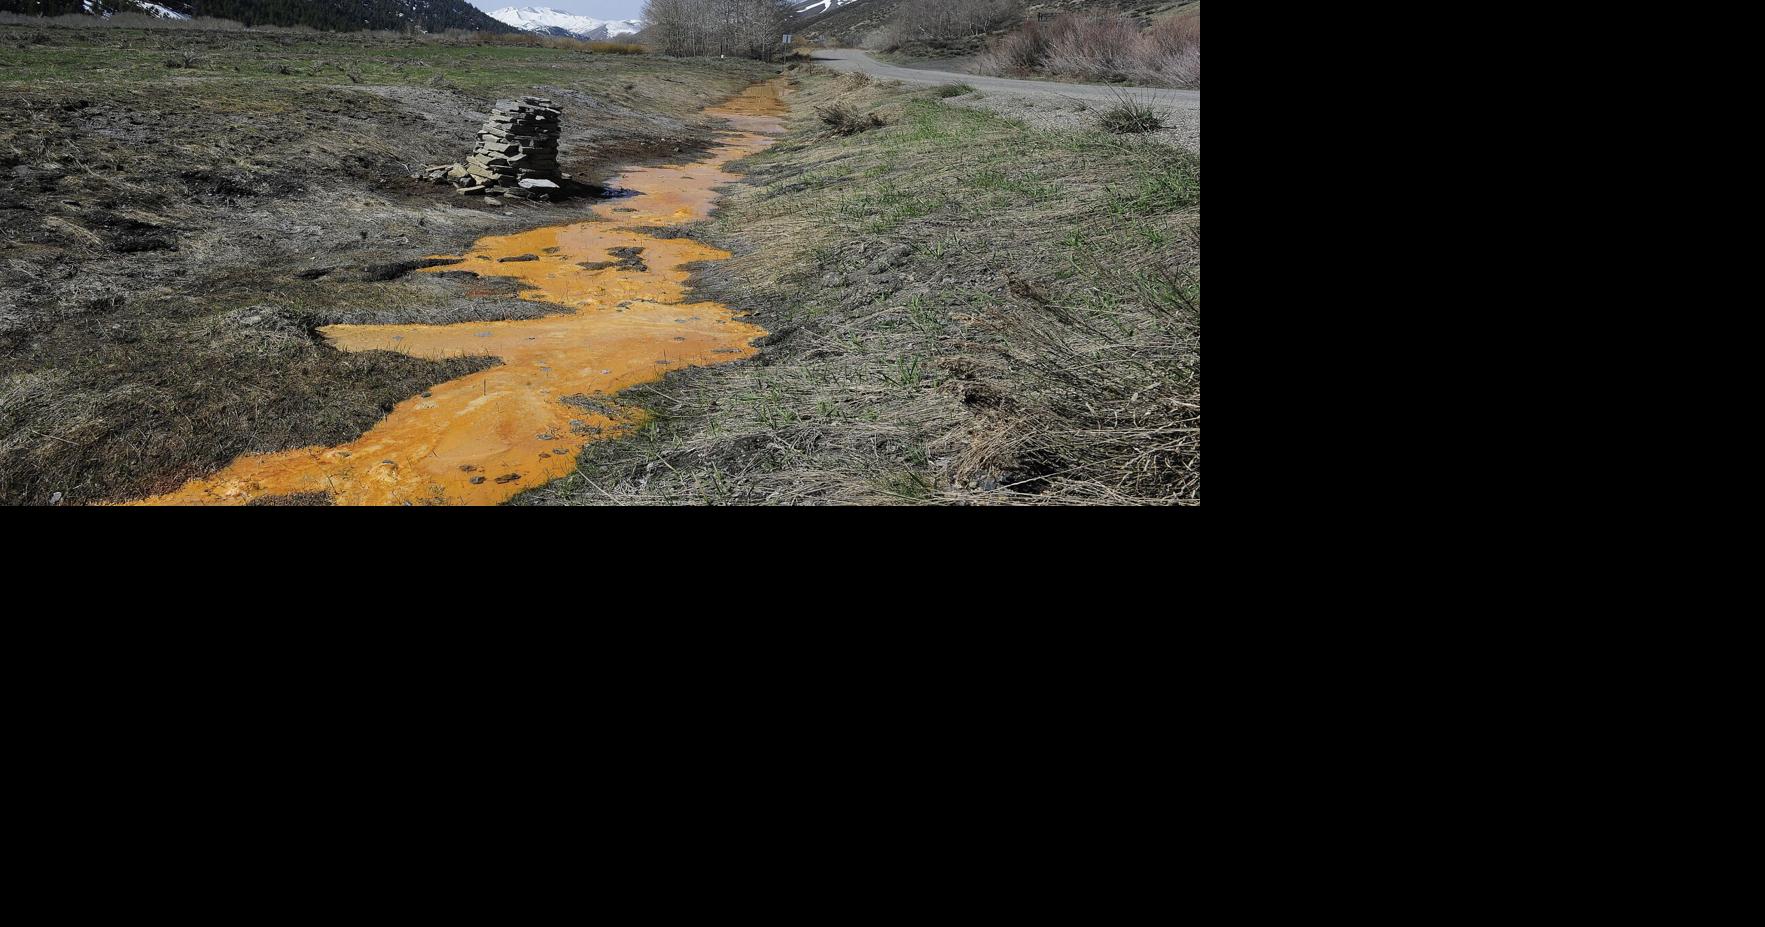 US gold mining companies face pushback for pollution